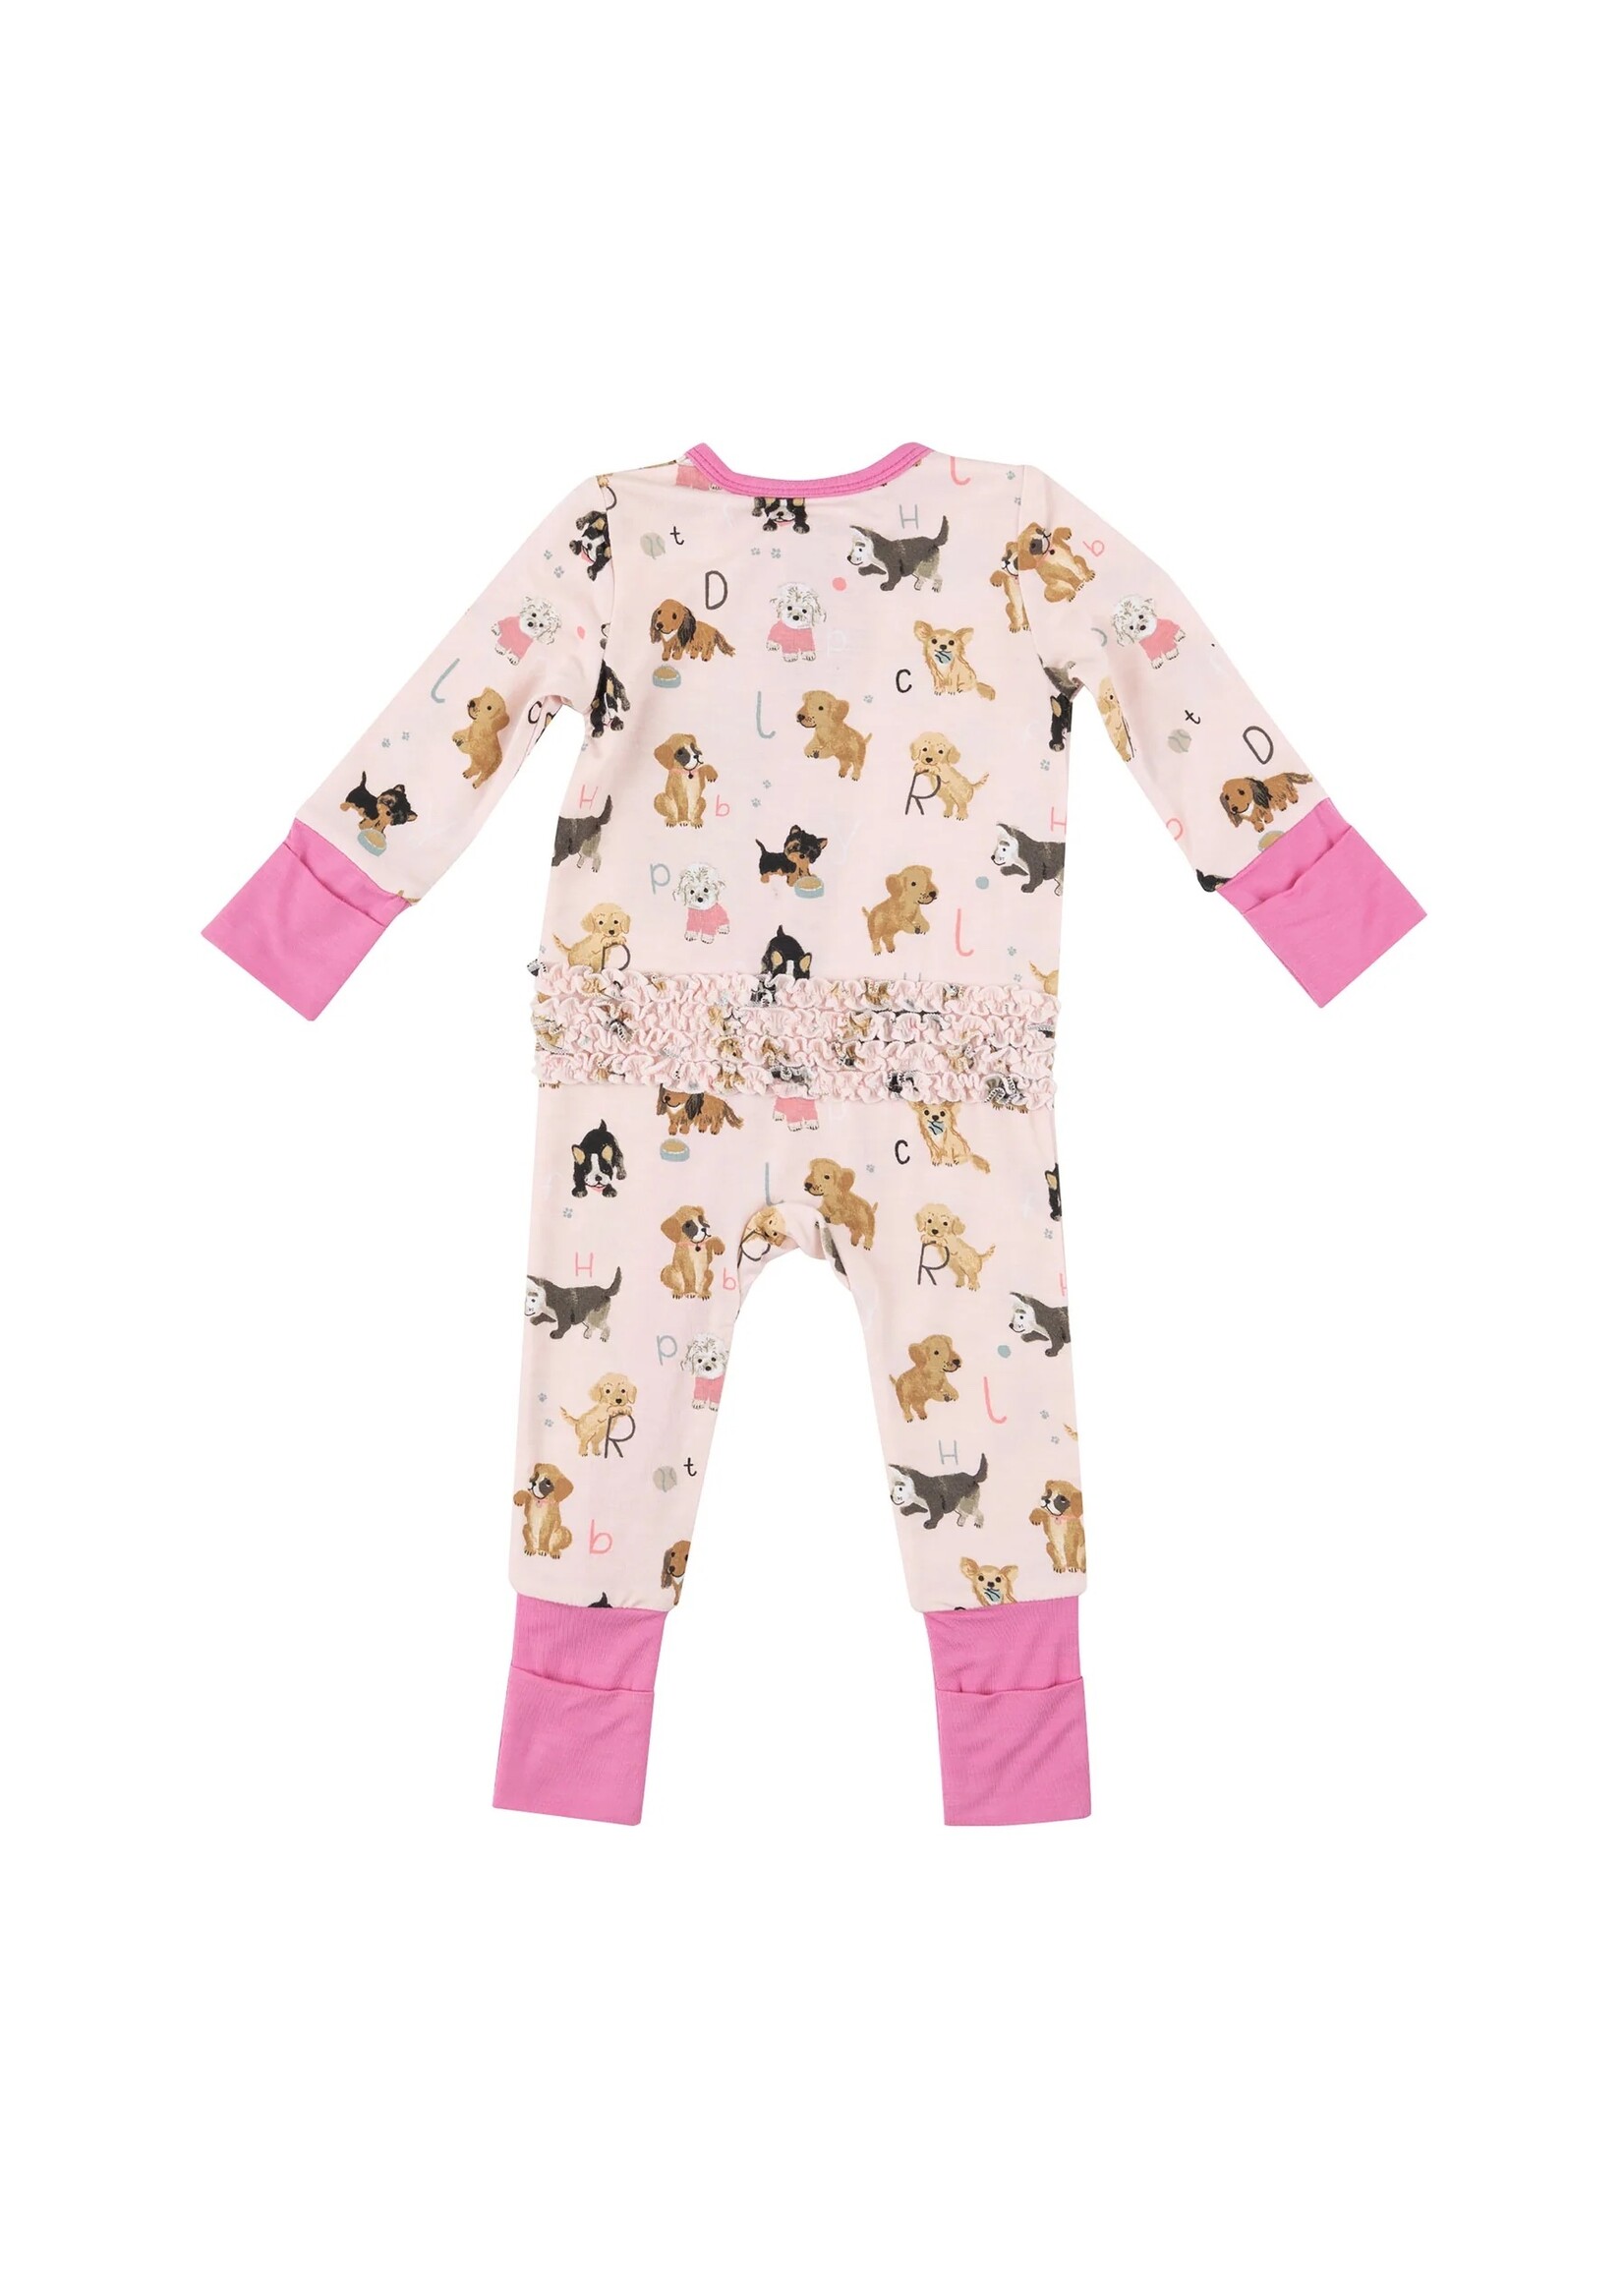 Angel Dear 2 Way Zipper Romper - Puppy Alphabet (available in 2 colors)